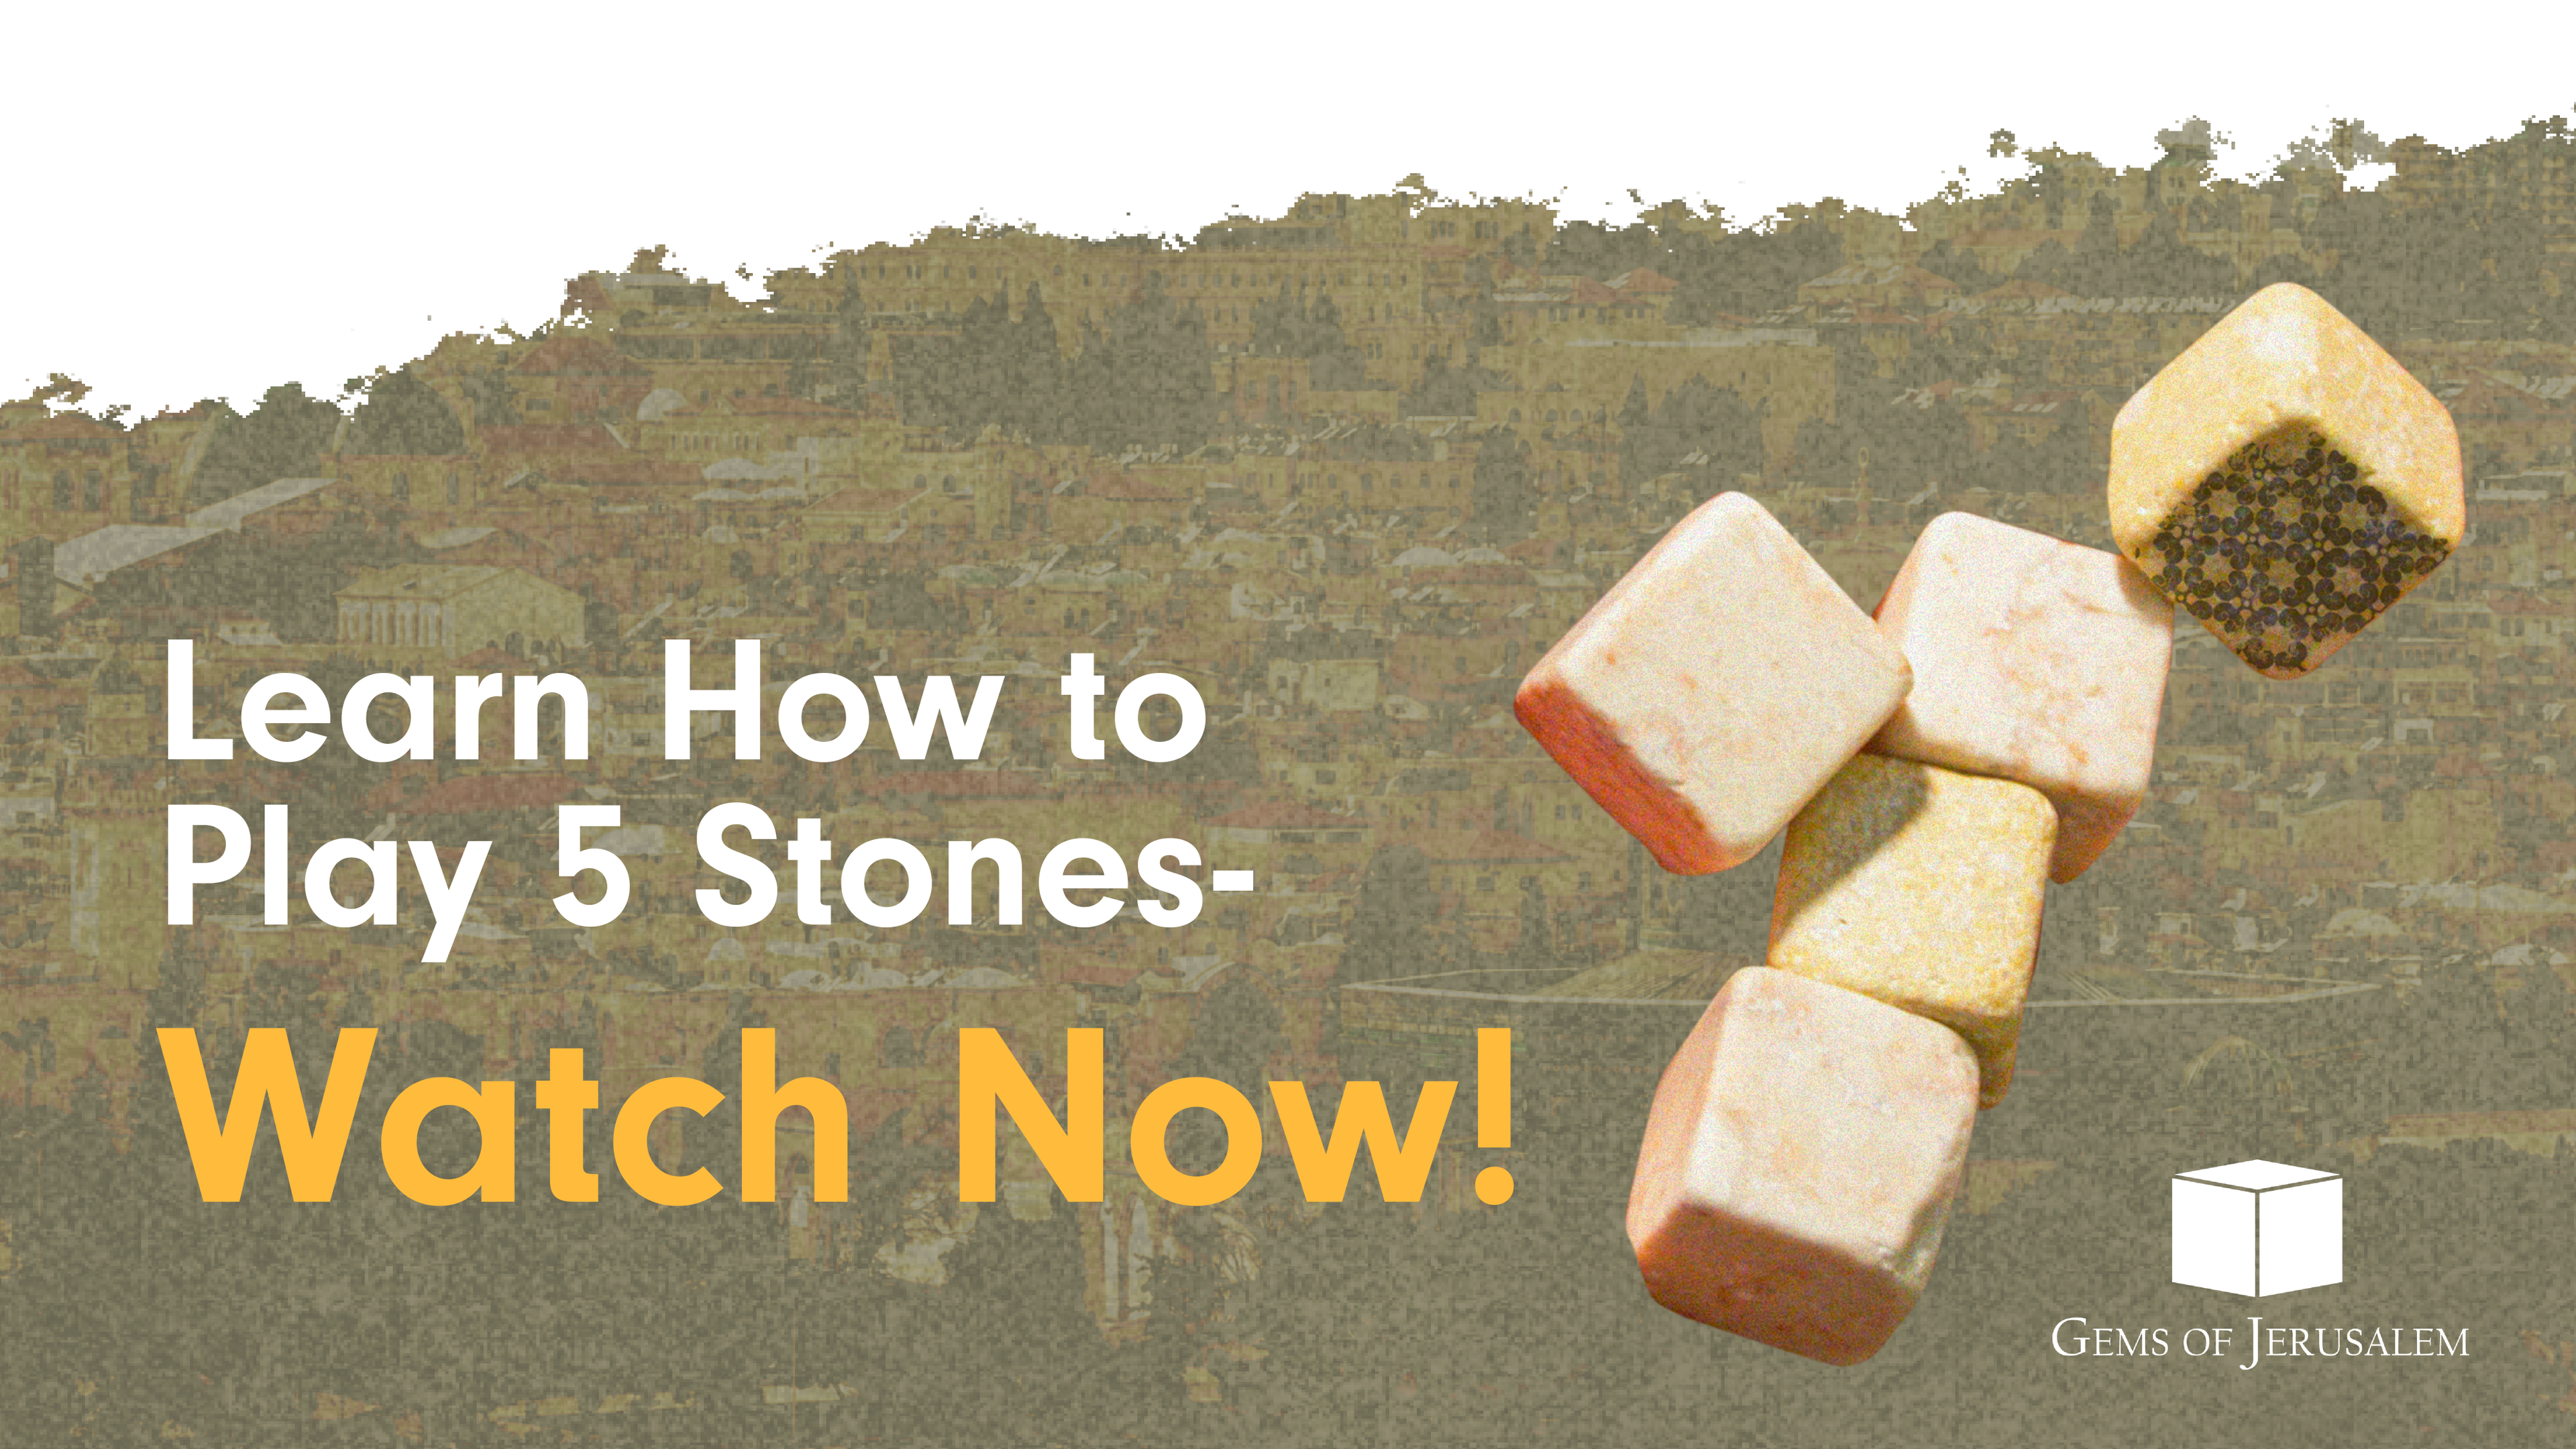 Load video: Learn to Play 5 Stones